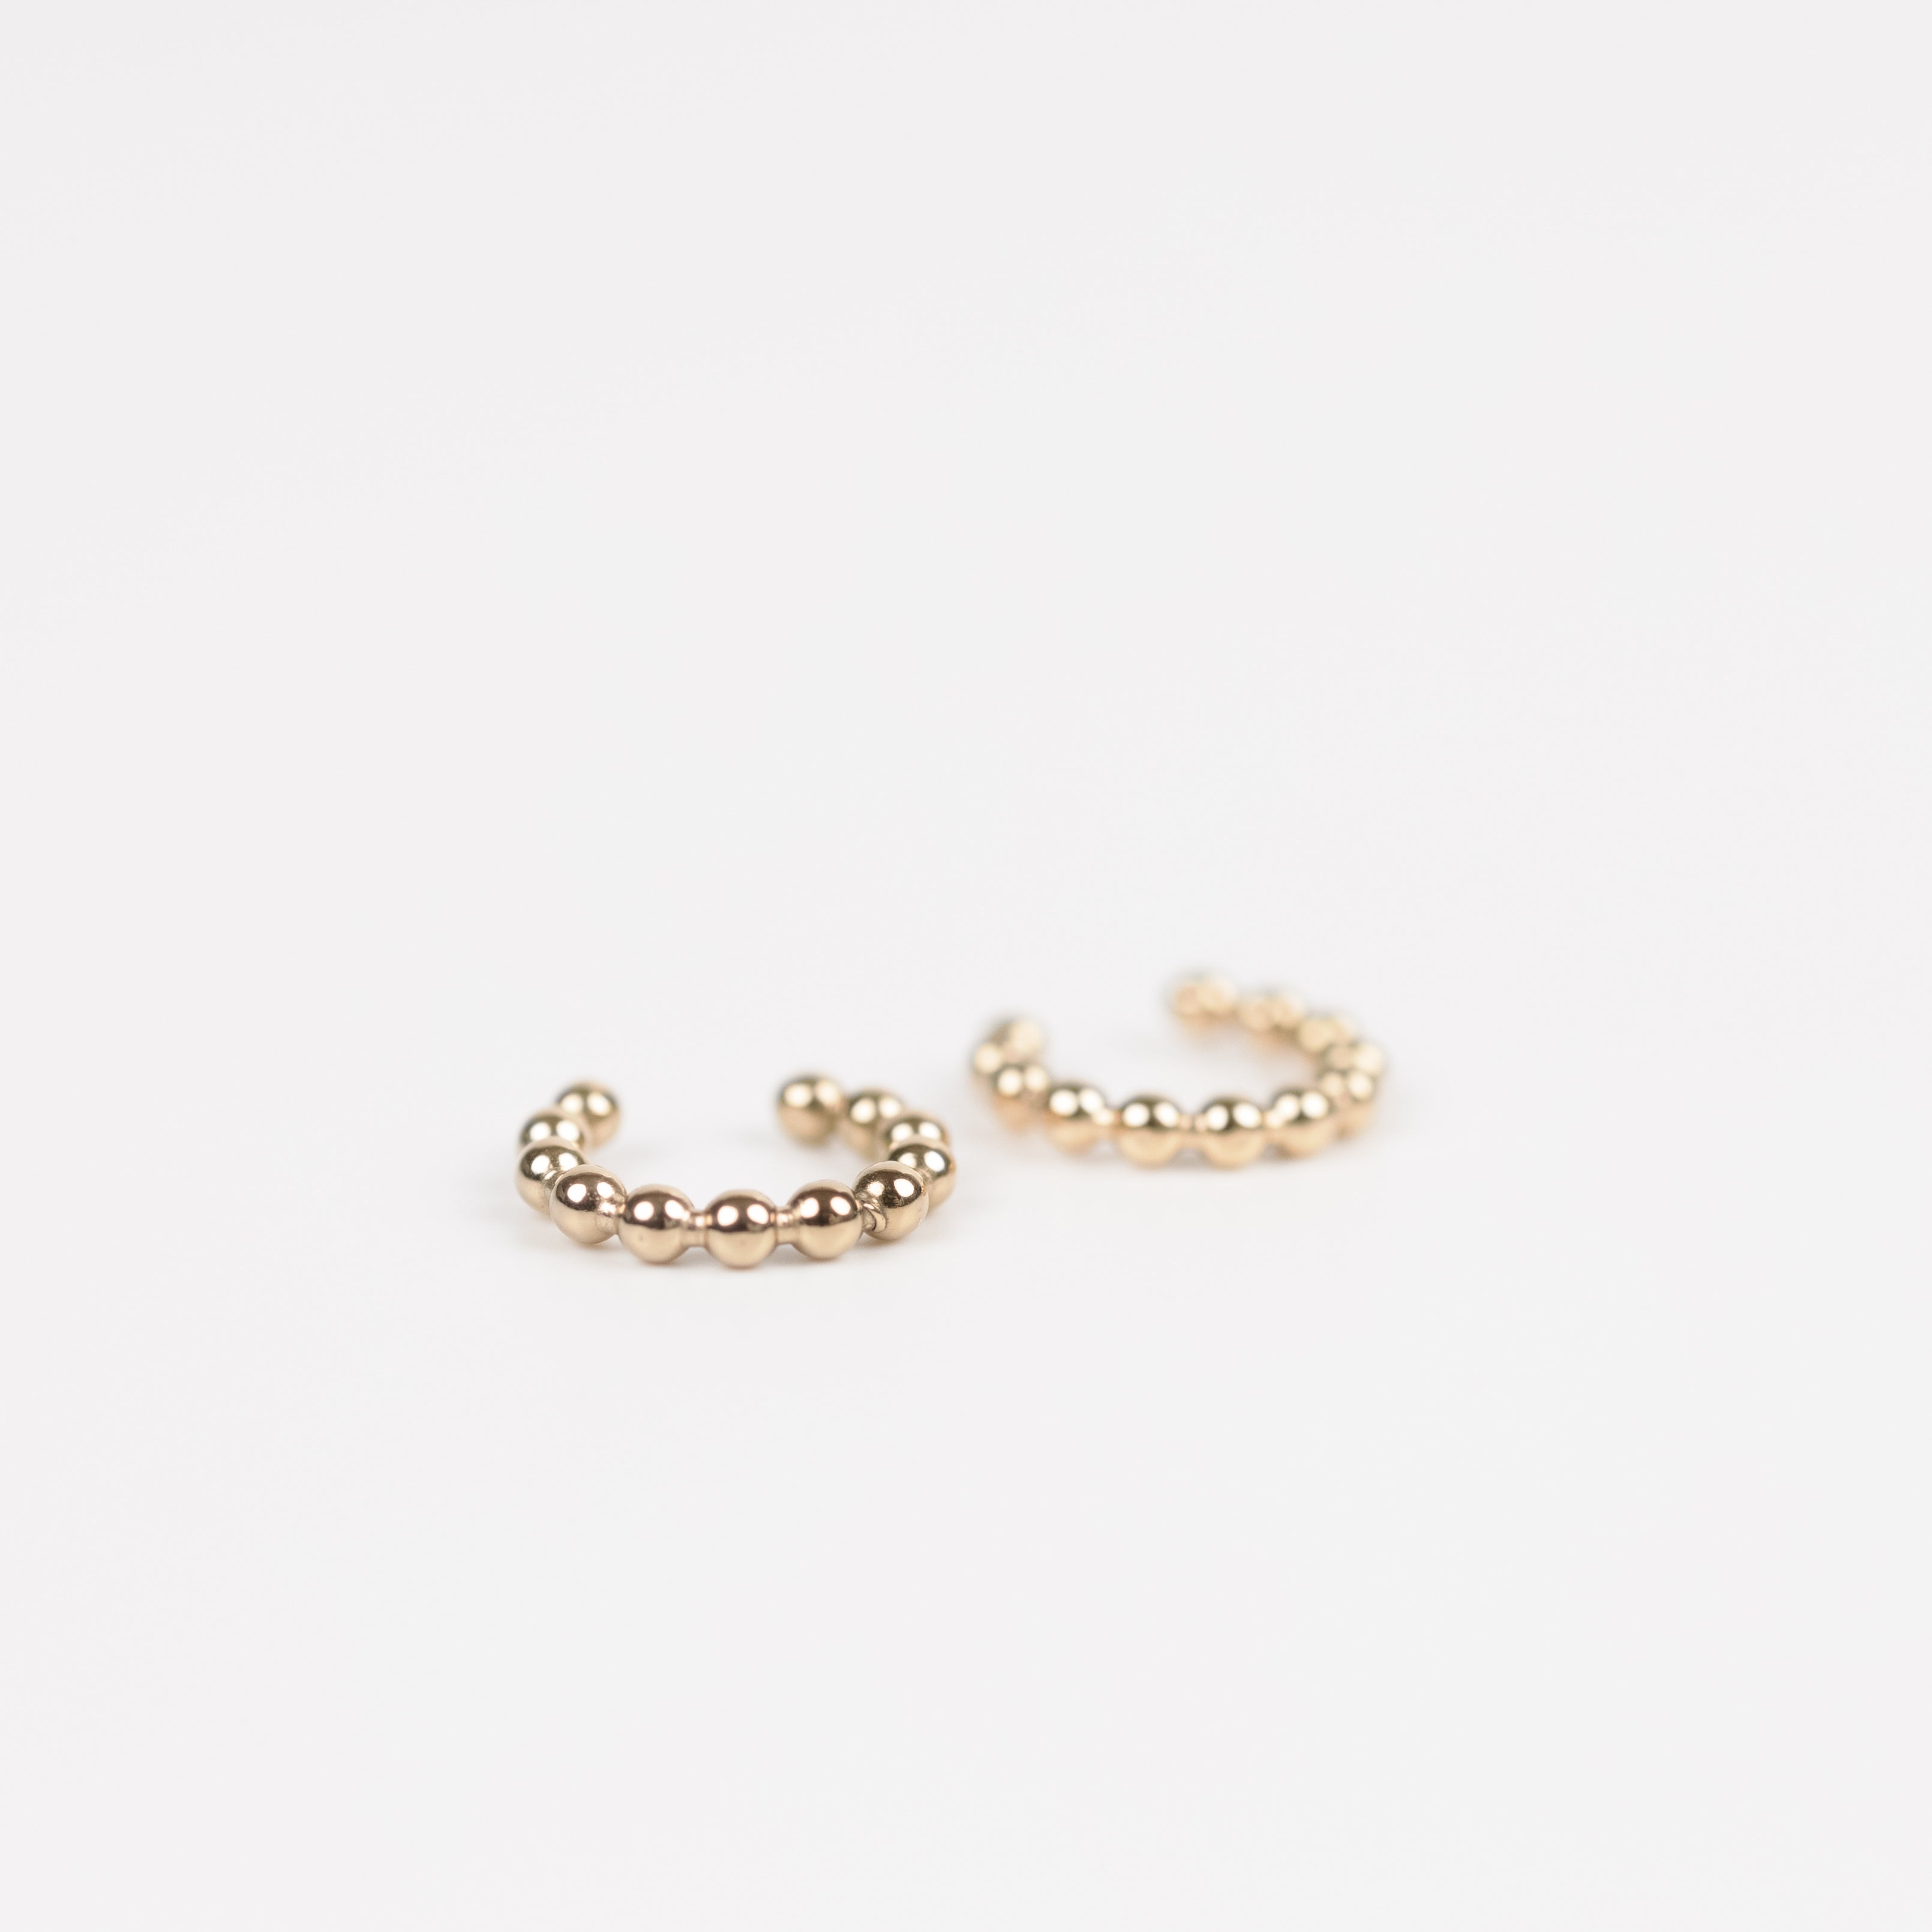 Bead Cuff Earrings - Stainless Steel 18K gold plated - Zafeer